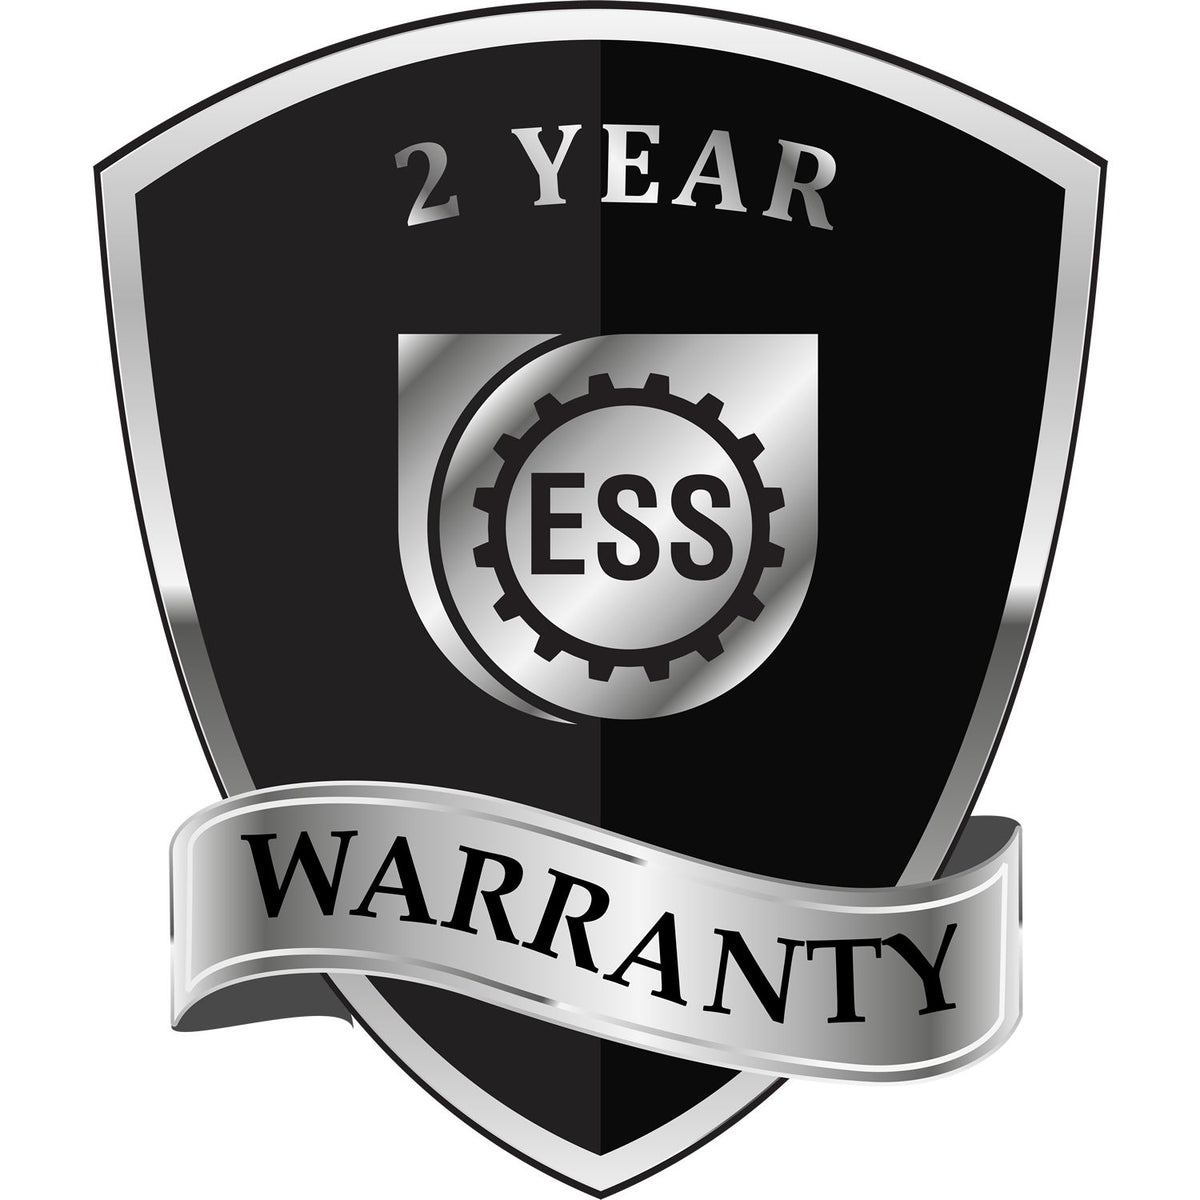 A black and silver badge or emblem showing warranty information for the Gift Georgia Architect Seal